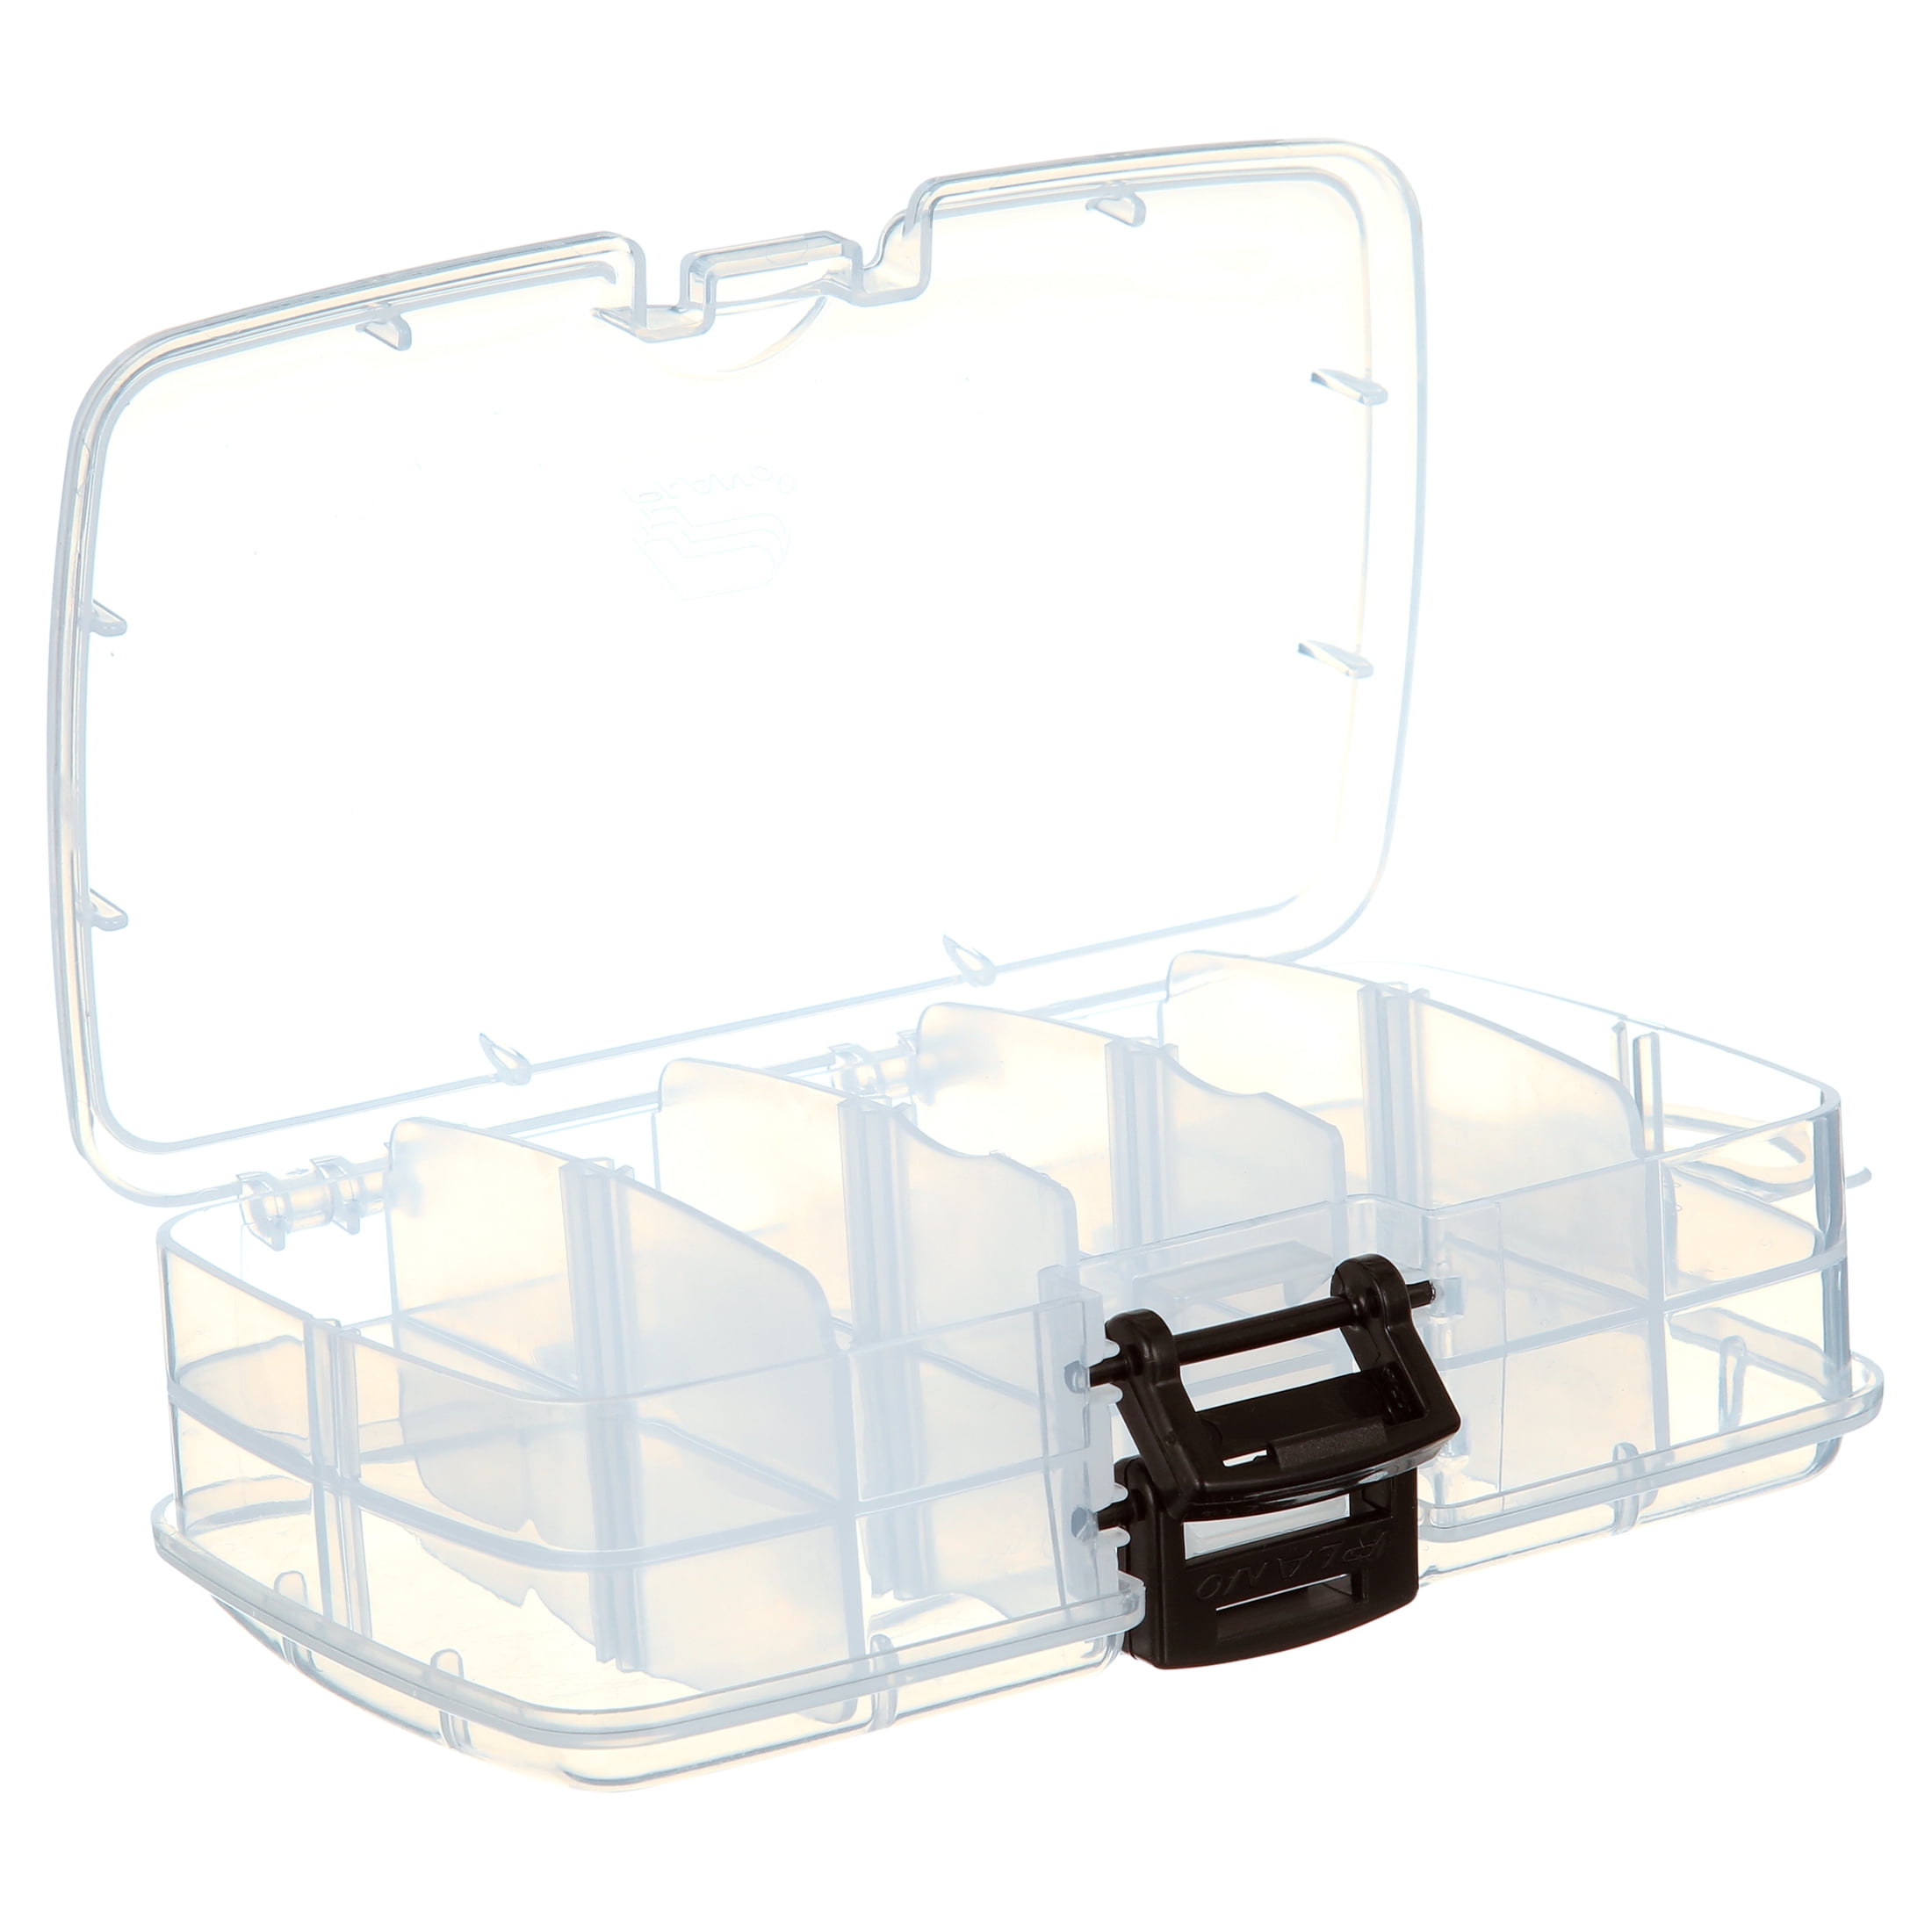 PLANO Fishing Tackle Double-Sided ADJUSTABLE TACKLE ORGANIZER